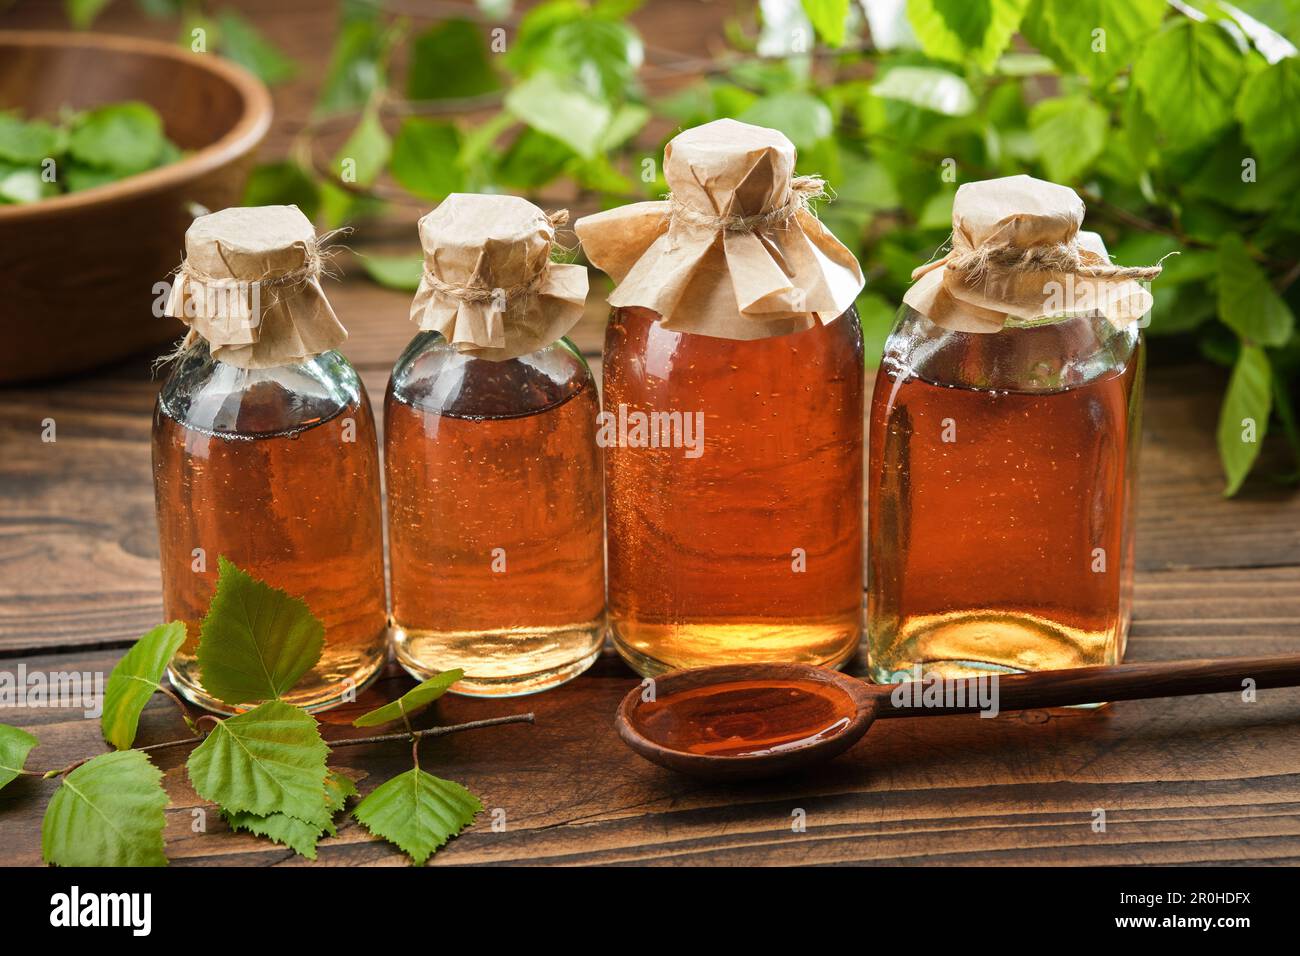 Bottles of birch essential oil, infusion or tincture. Birch syrup or coal tar oil bottles. Birch tree twigs with leaves. Alternative herbal medicine Stock Photo